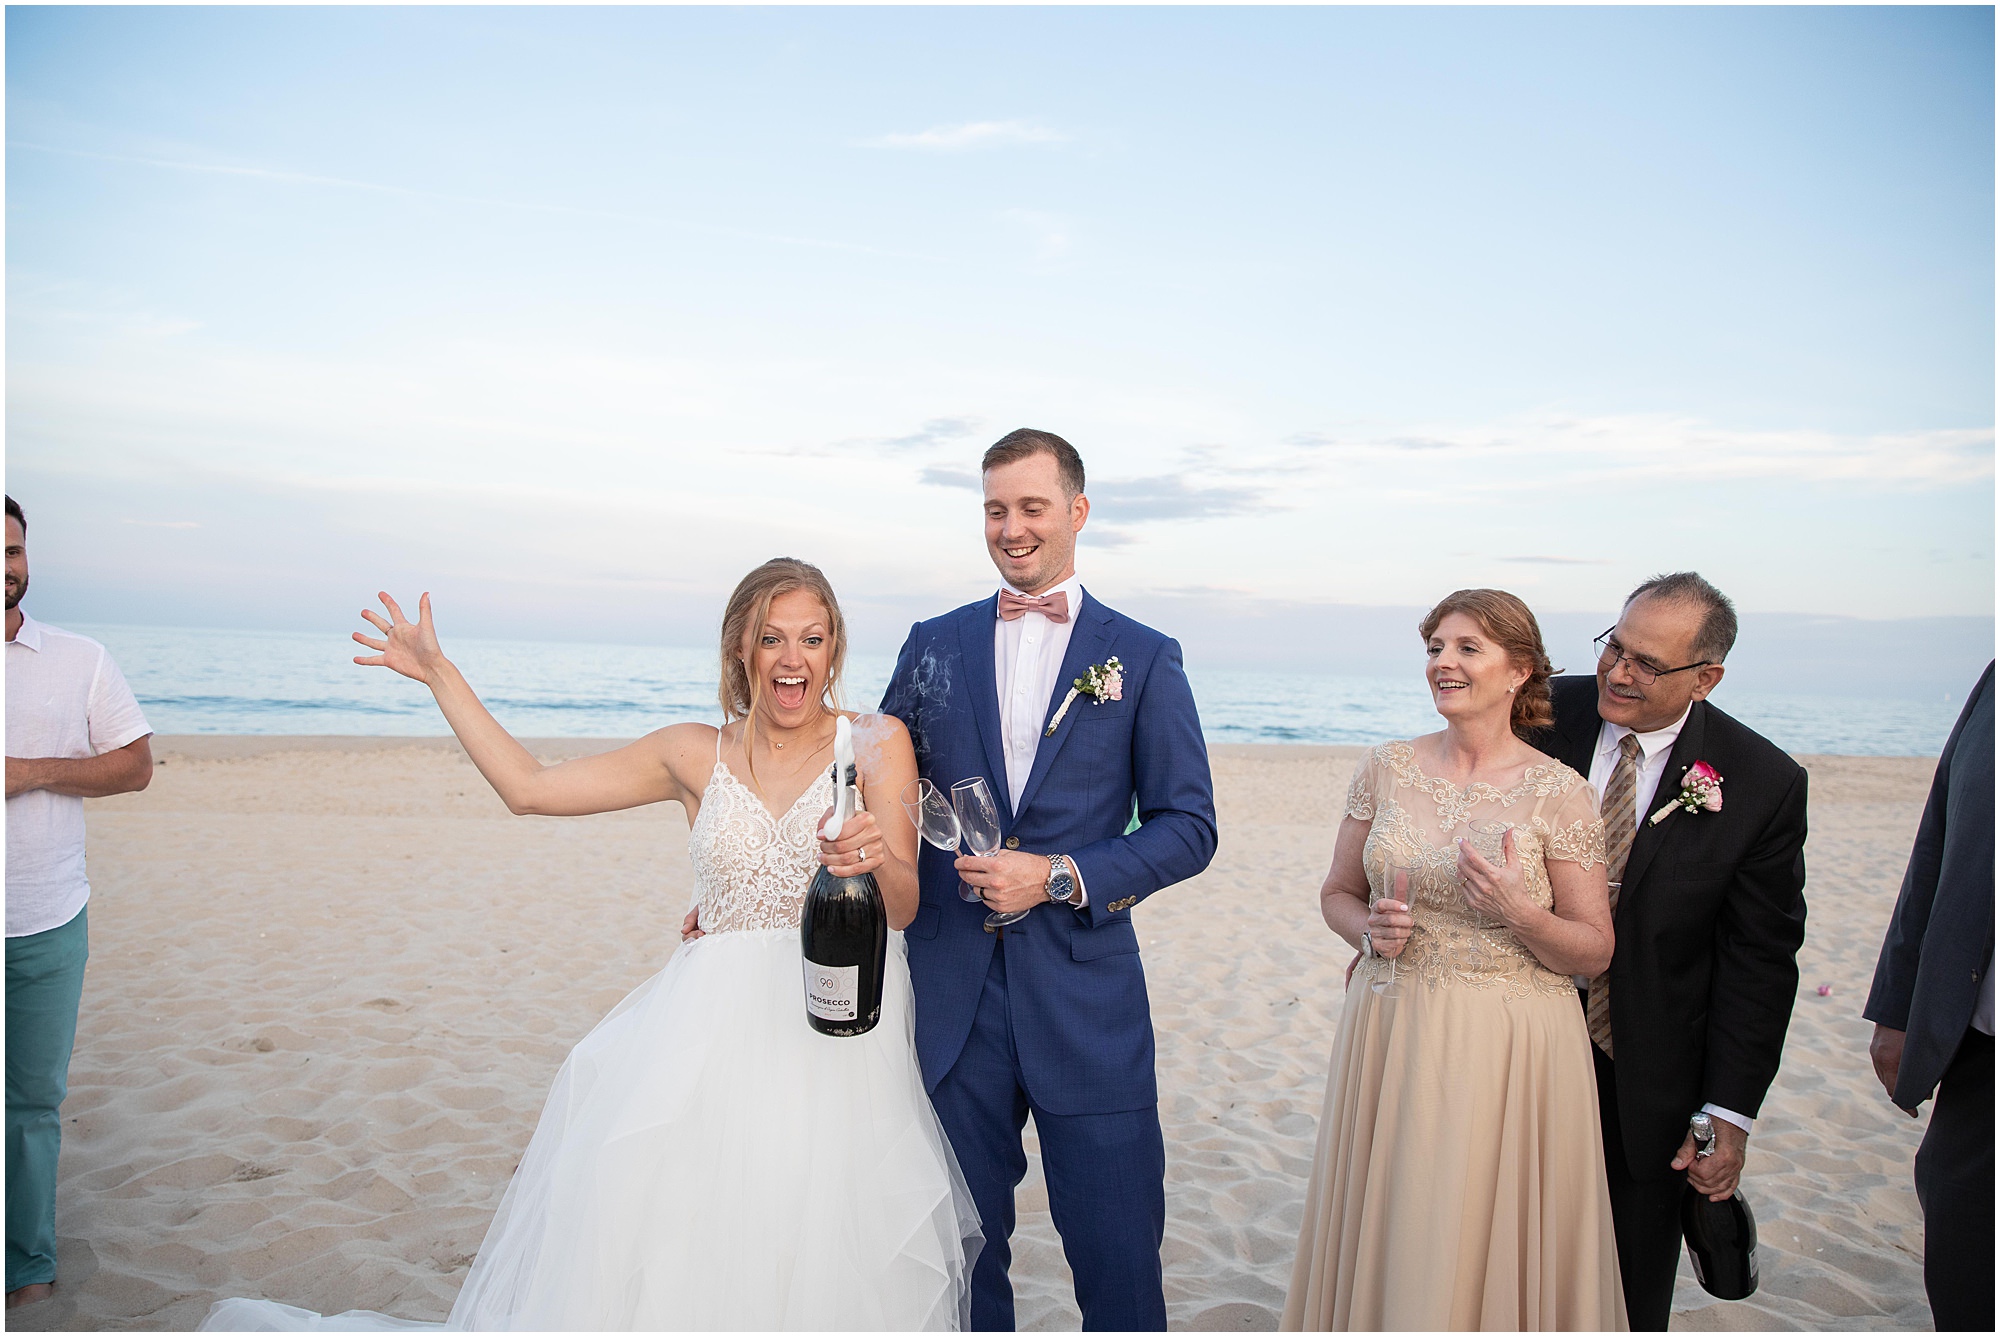 Champagne toast on beach at LBI microwedding